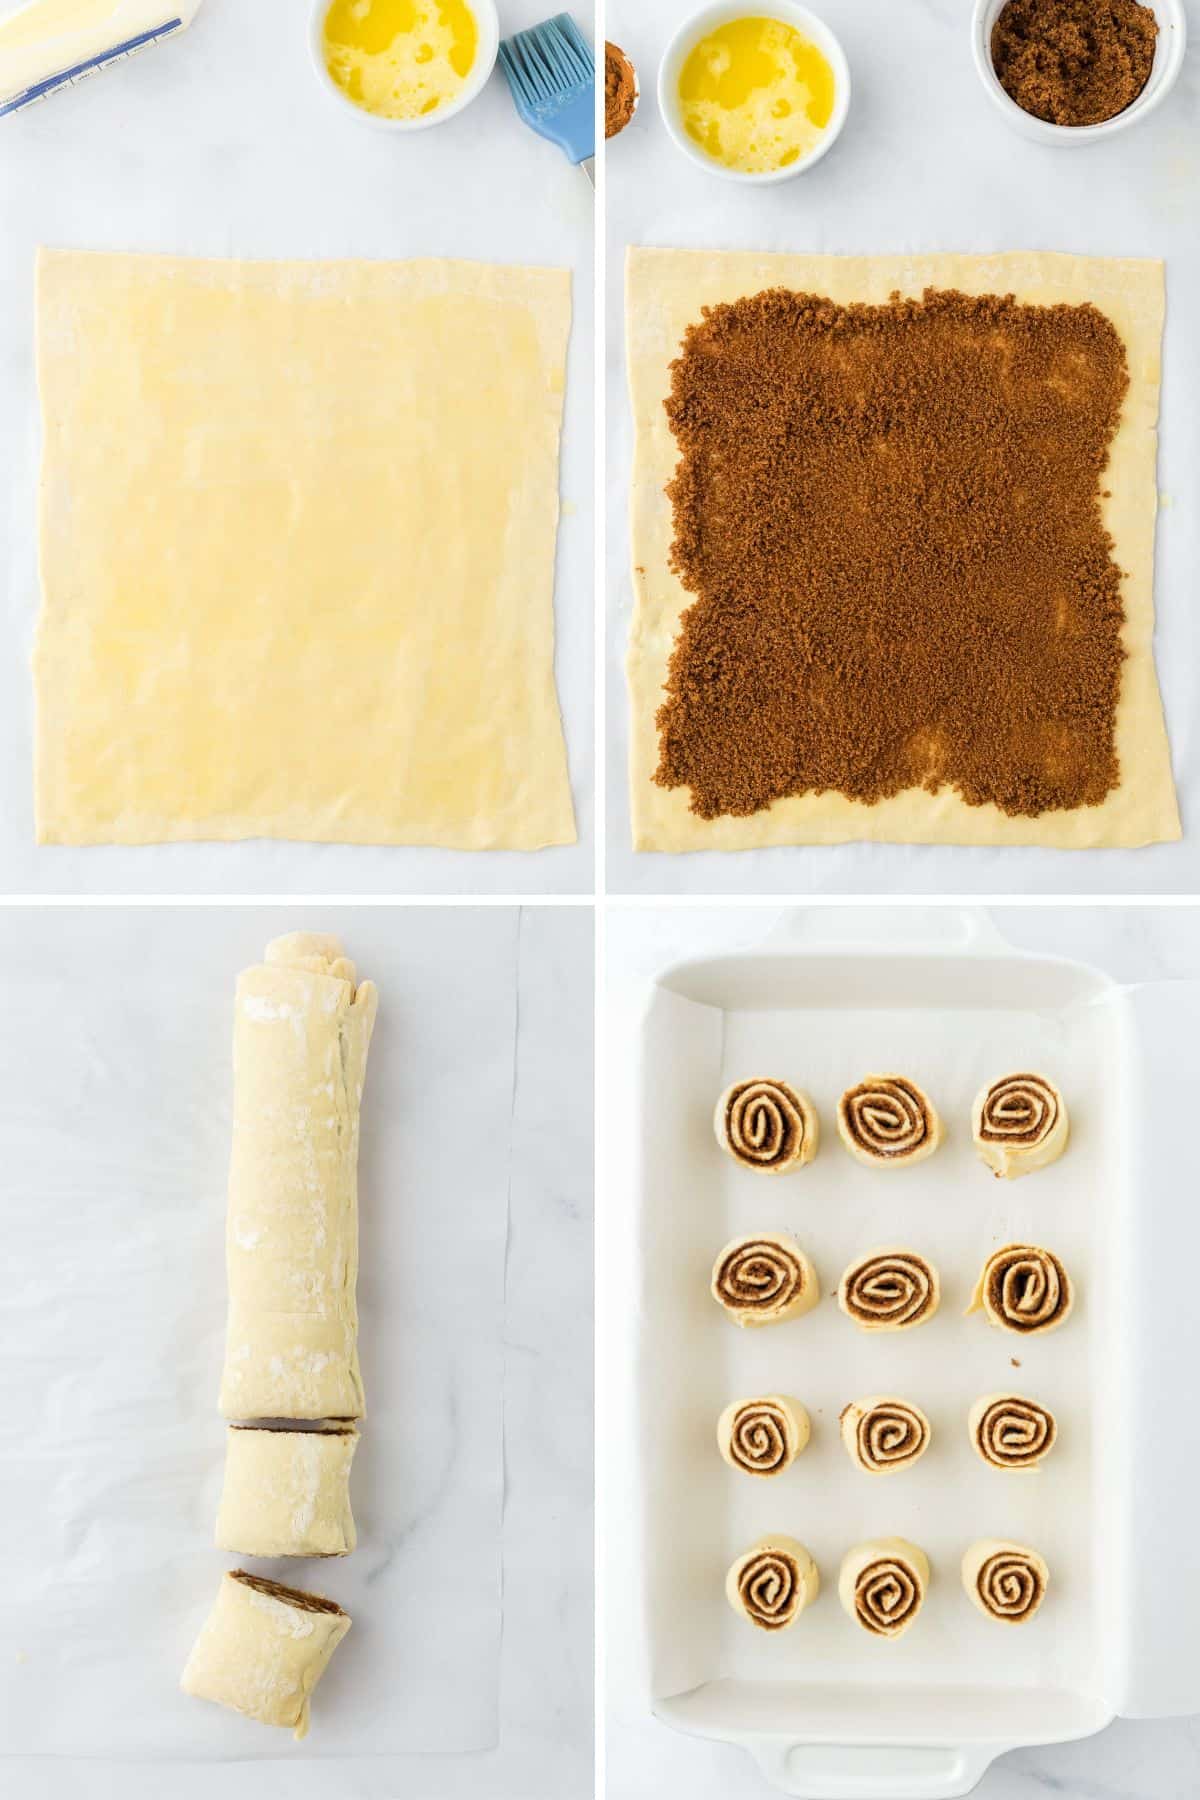 A collage of images showing the puff pastry rolled out, sprinkled with sugar, then rolled up, and finally sliced in a pan.